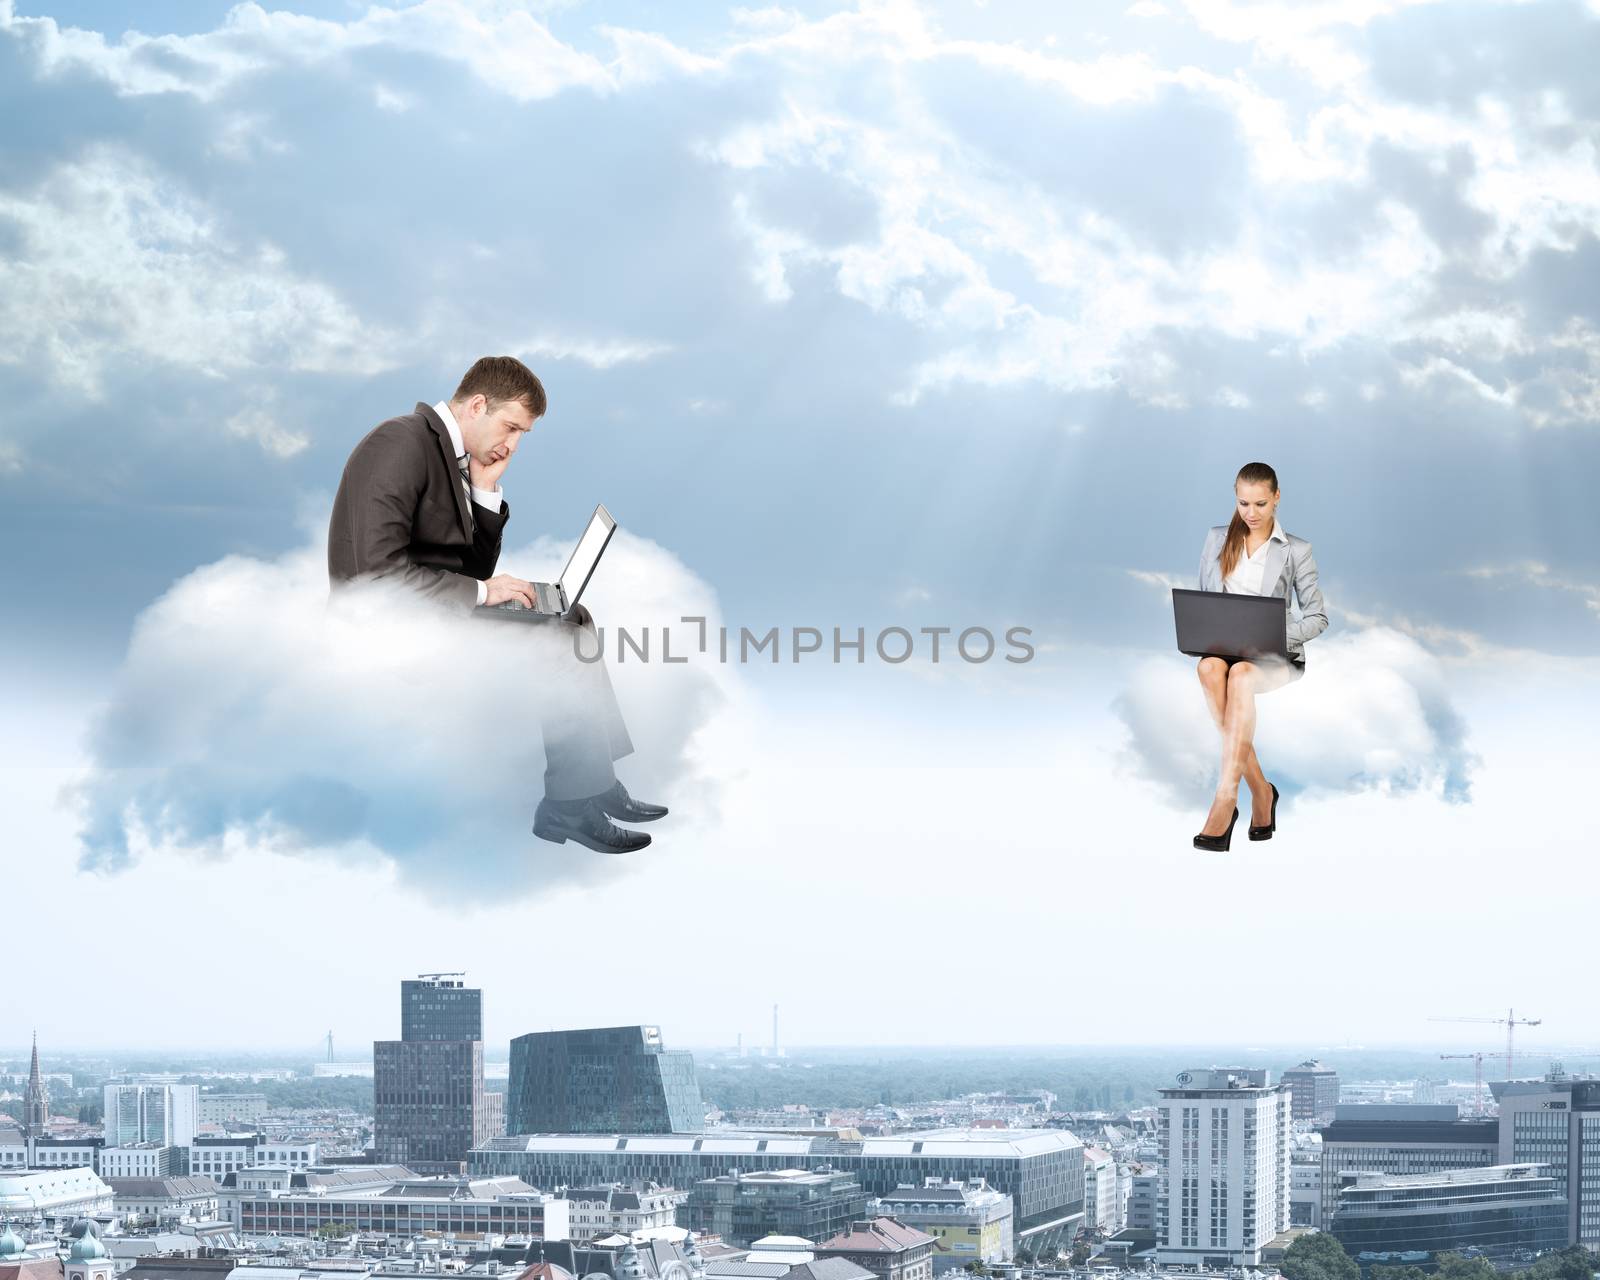 Business people working on laptops and sitting on clouds,  co-working concept